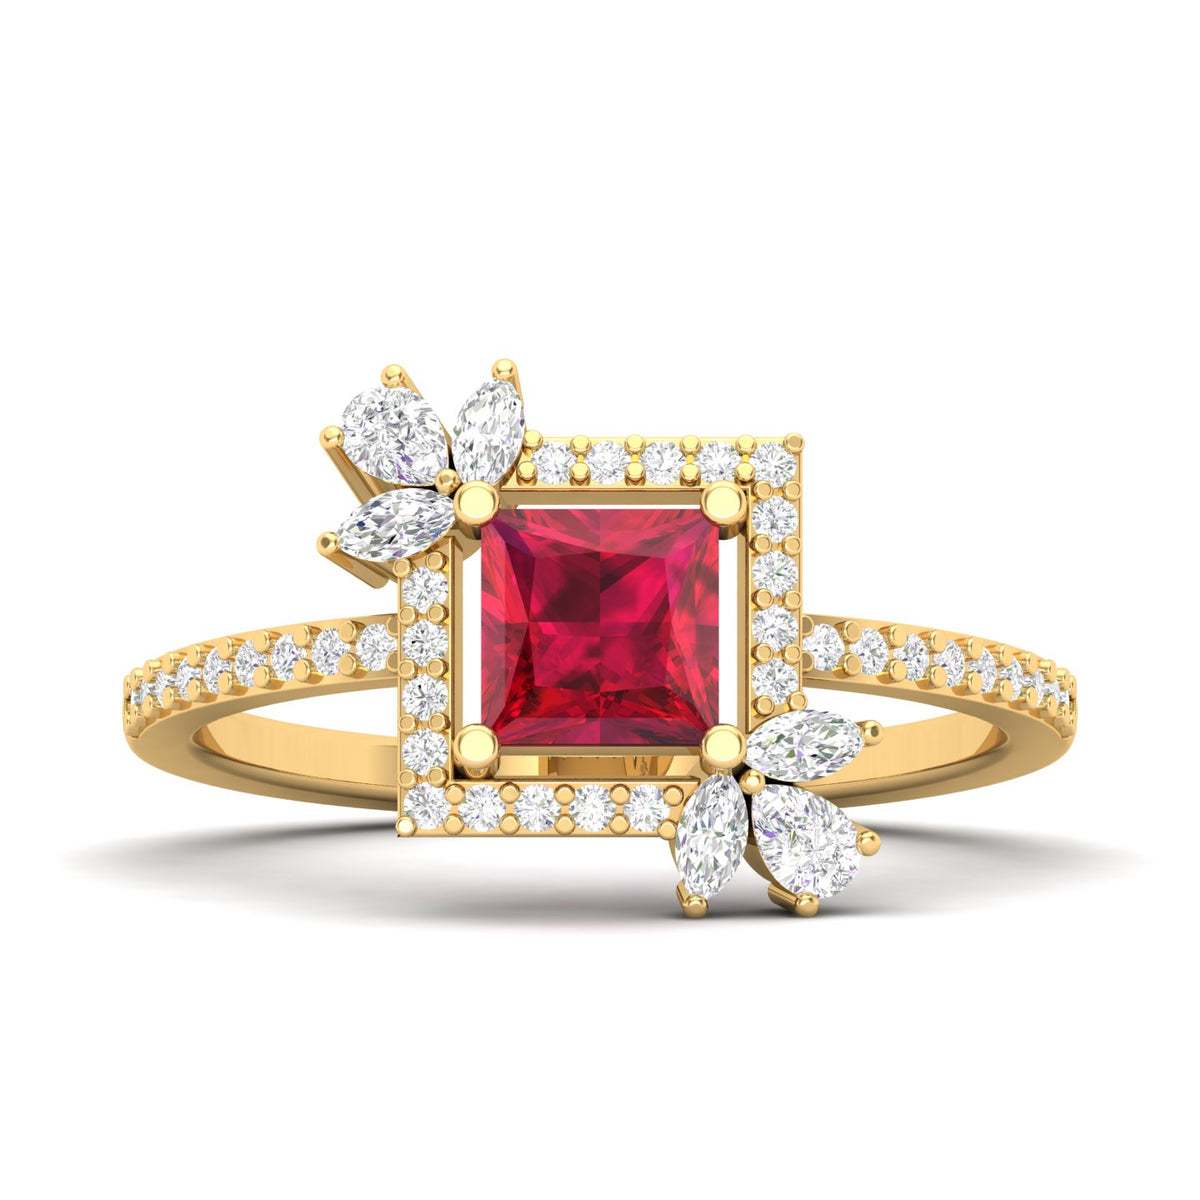 Maurya Solitaire Ruby Rose Garden Engagement Ring with Diamond Halo